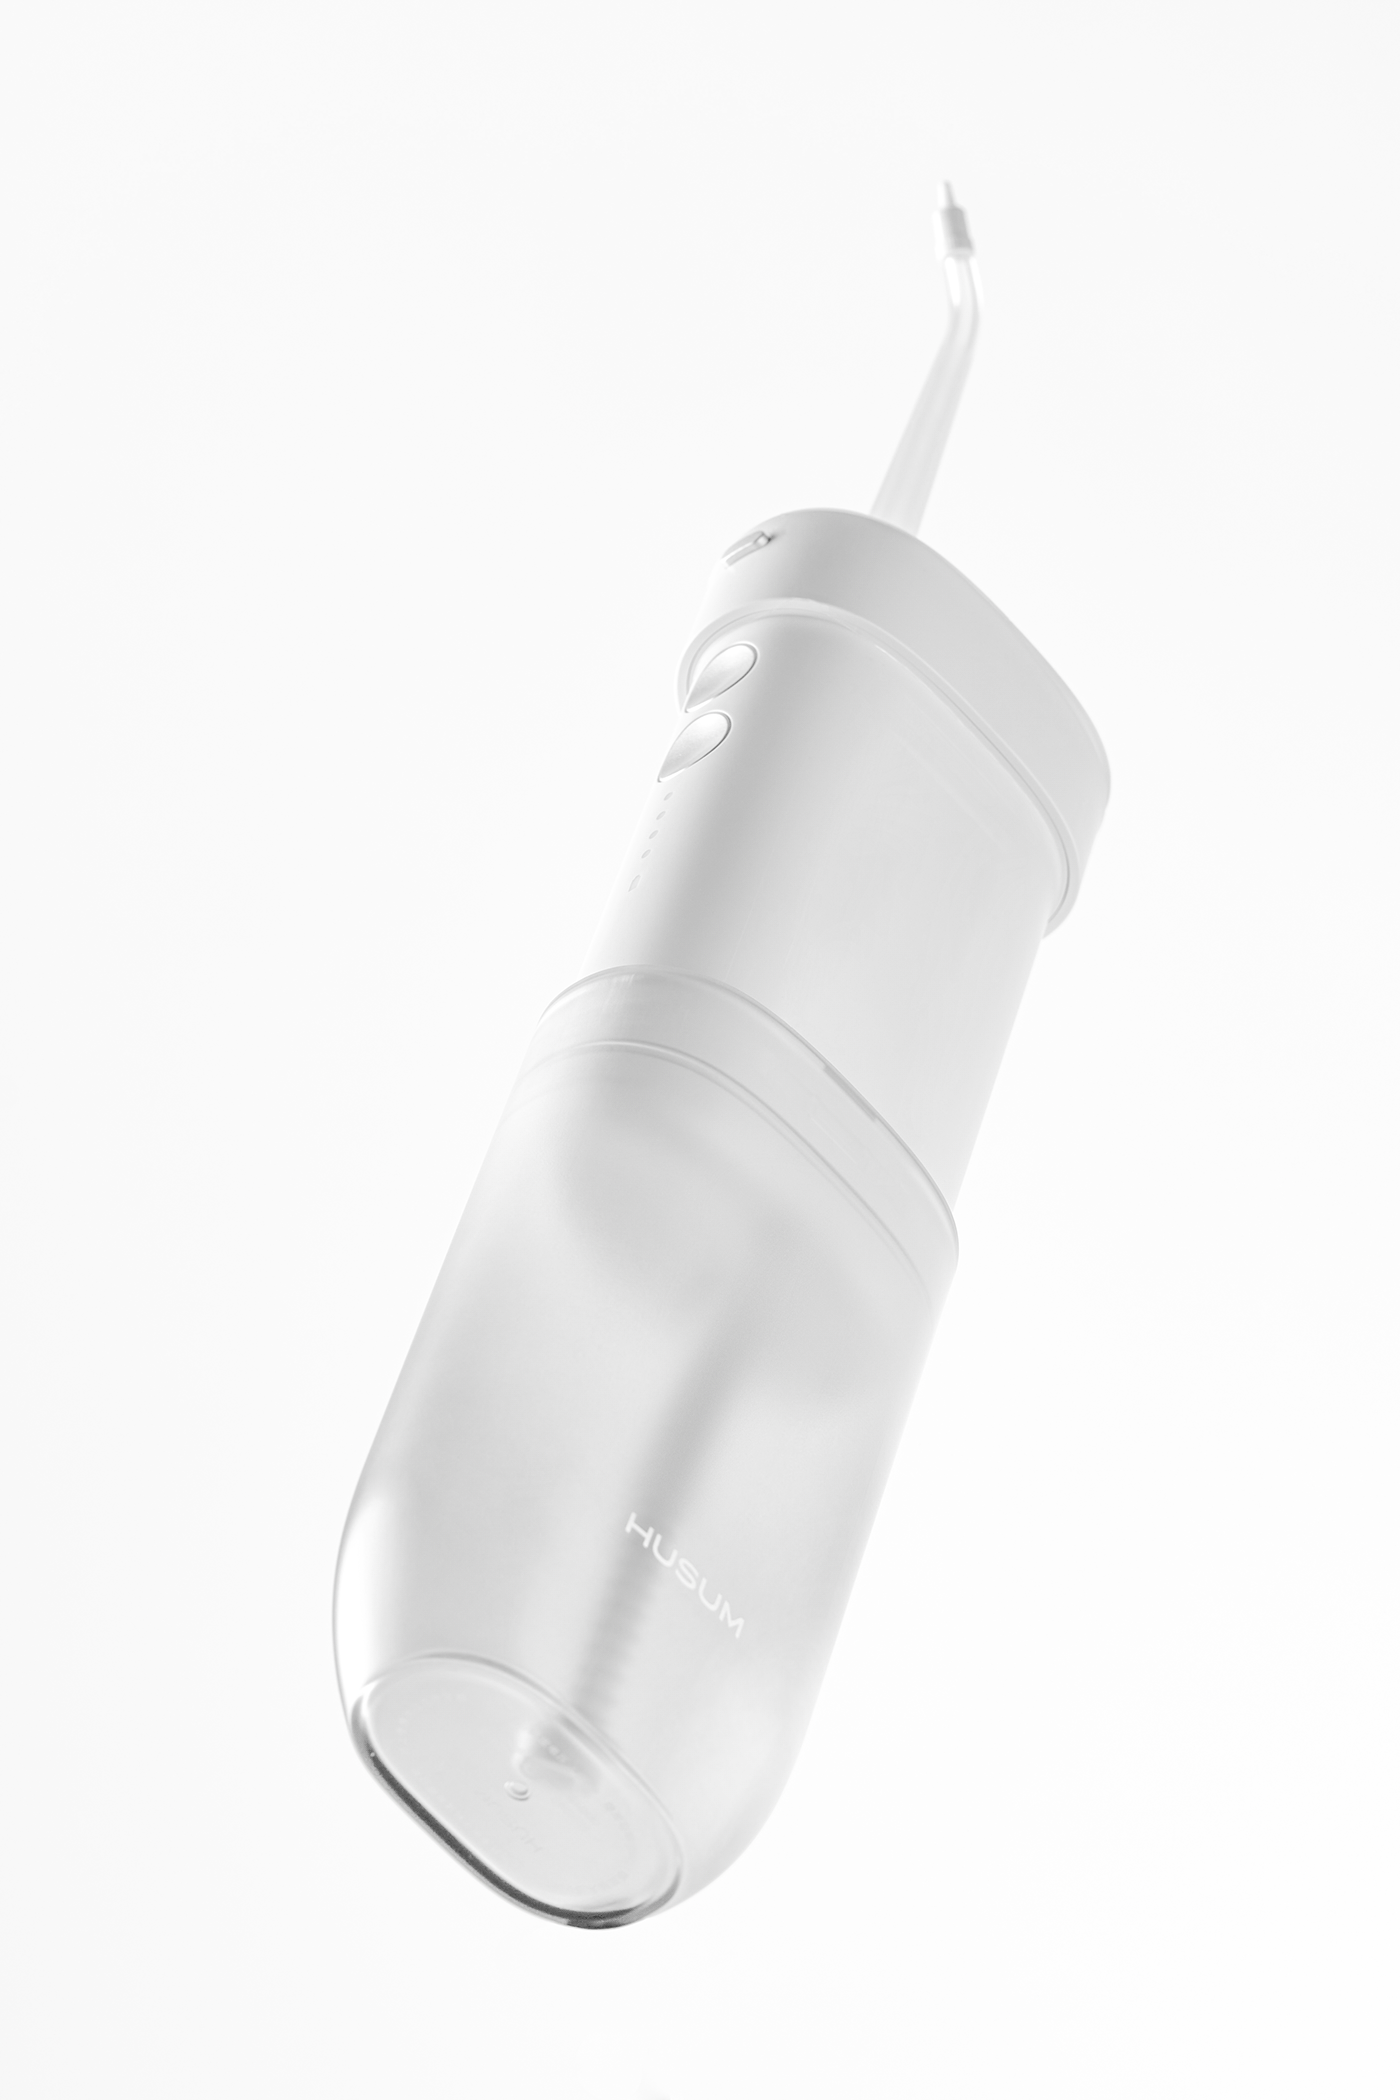 product design  design clean water product secondwhite second white oral irrigator industrial design  water flosser